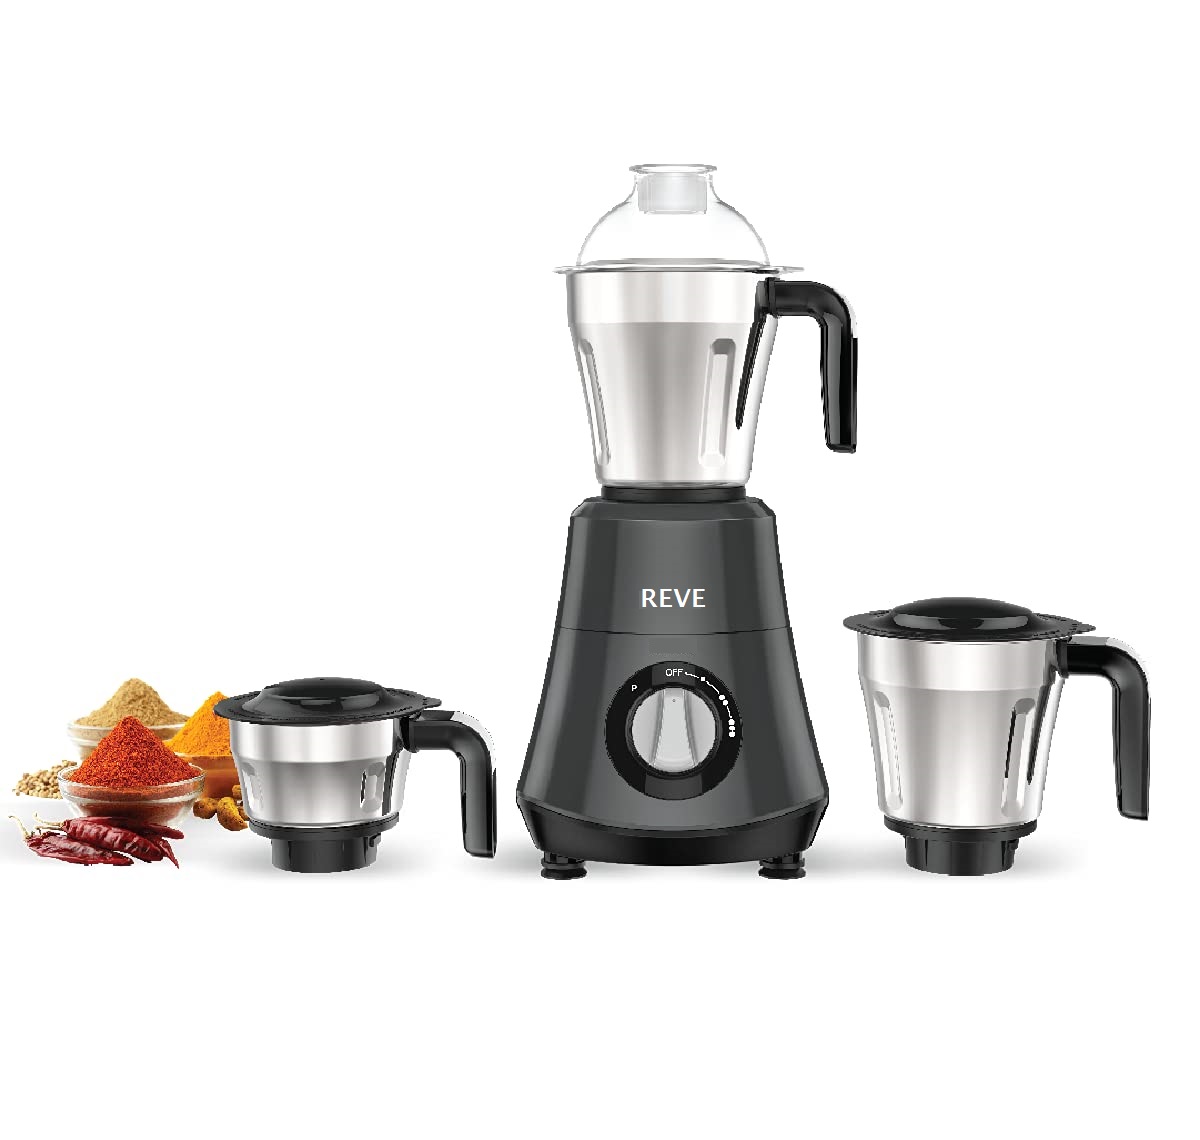 REVE 750 watt Mixer Grinder with 3 Wider mouth Stainless Steel Jar, Hands Free operation